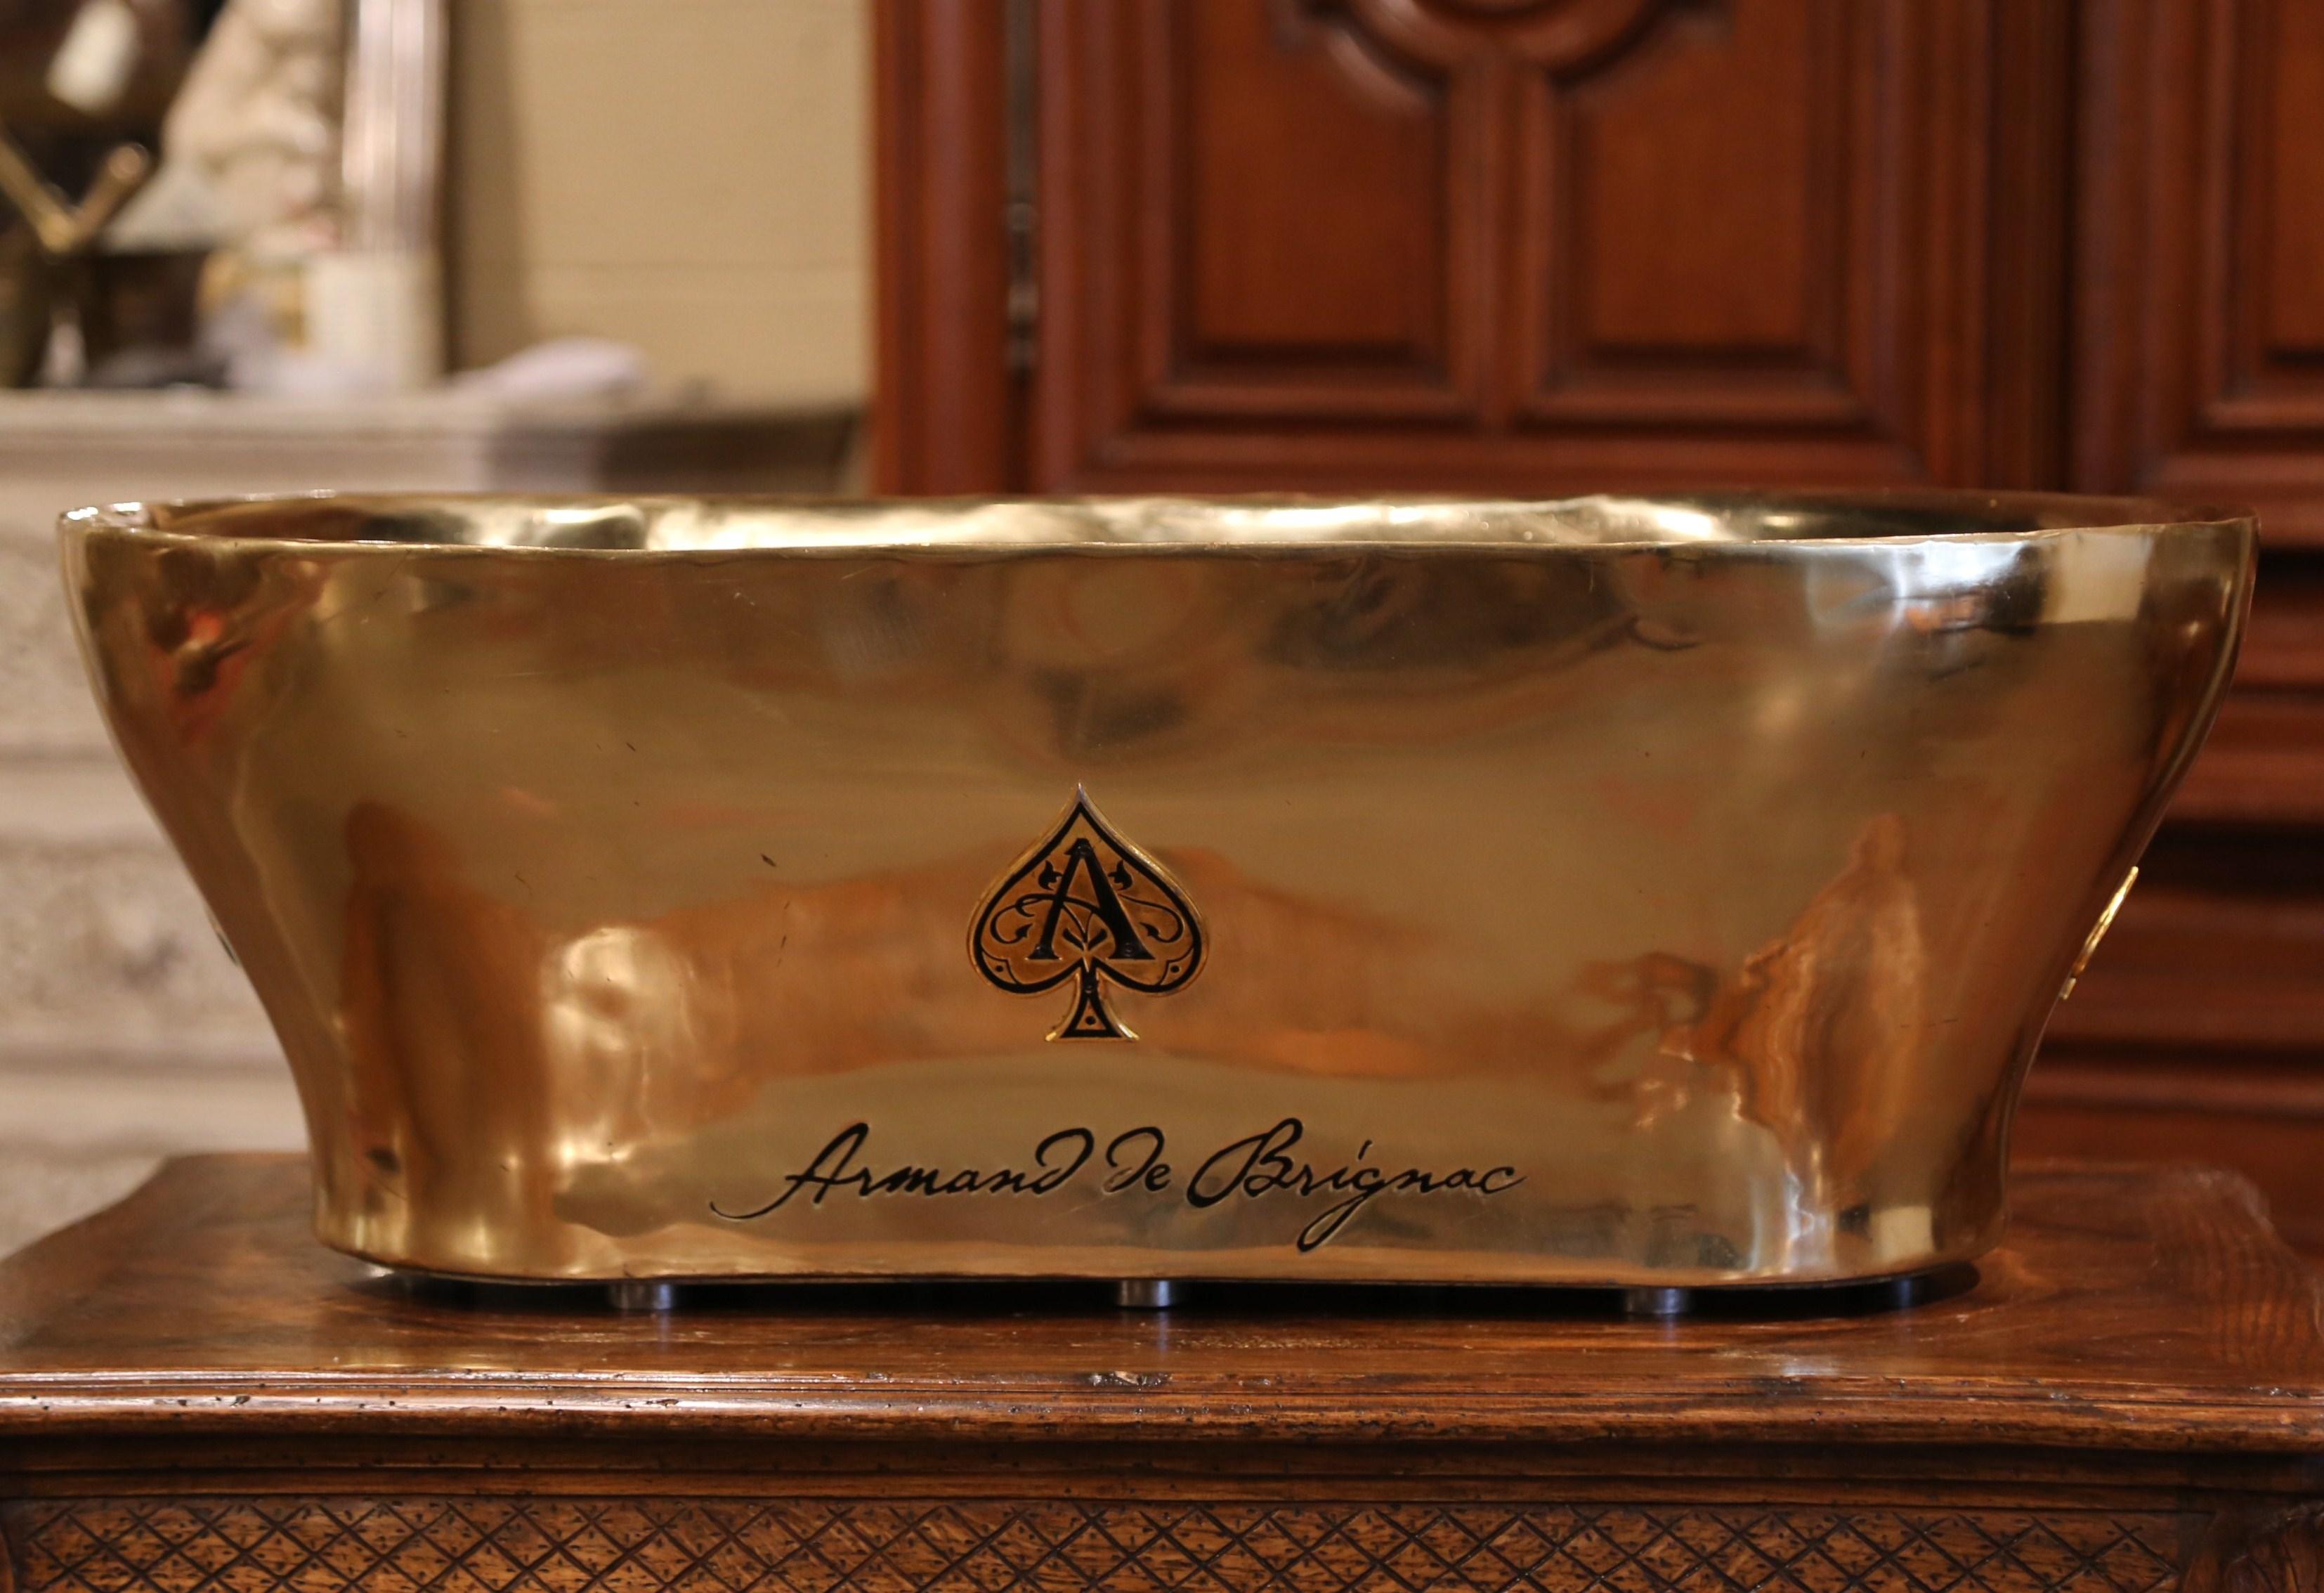 The important champagne cooler was created in France circa 1950; signed Armand de Brignac on both sides, the heavy brass tub would make a wonderful cooler for beer, wine or any drink needed to stay cold. The large tub is in excellent condition with